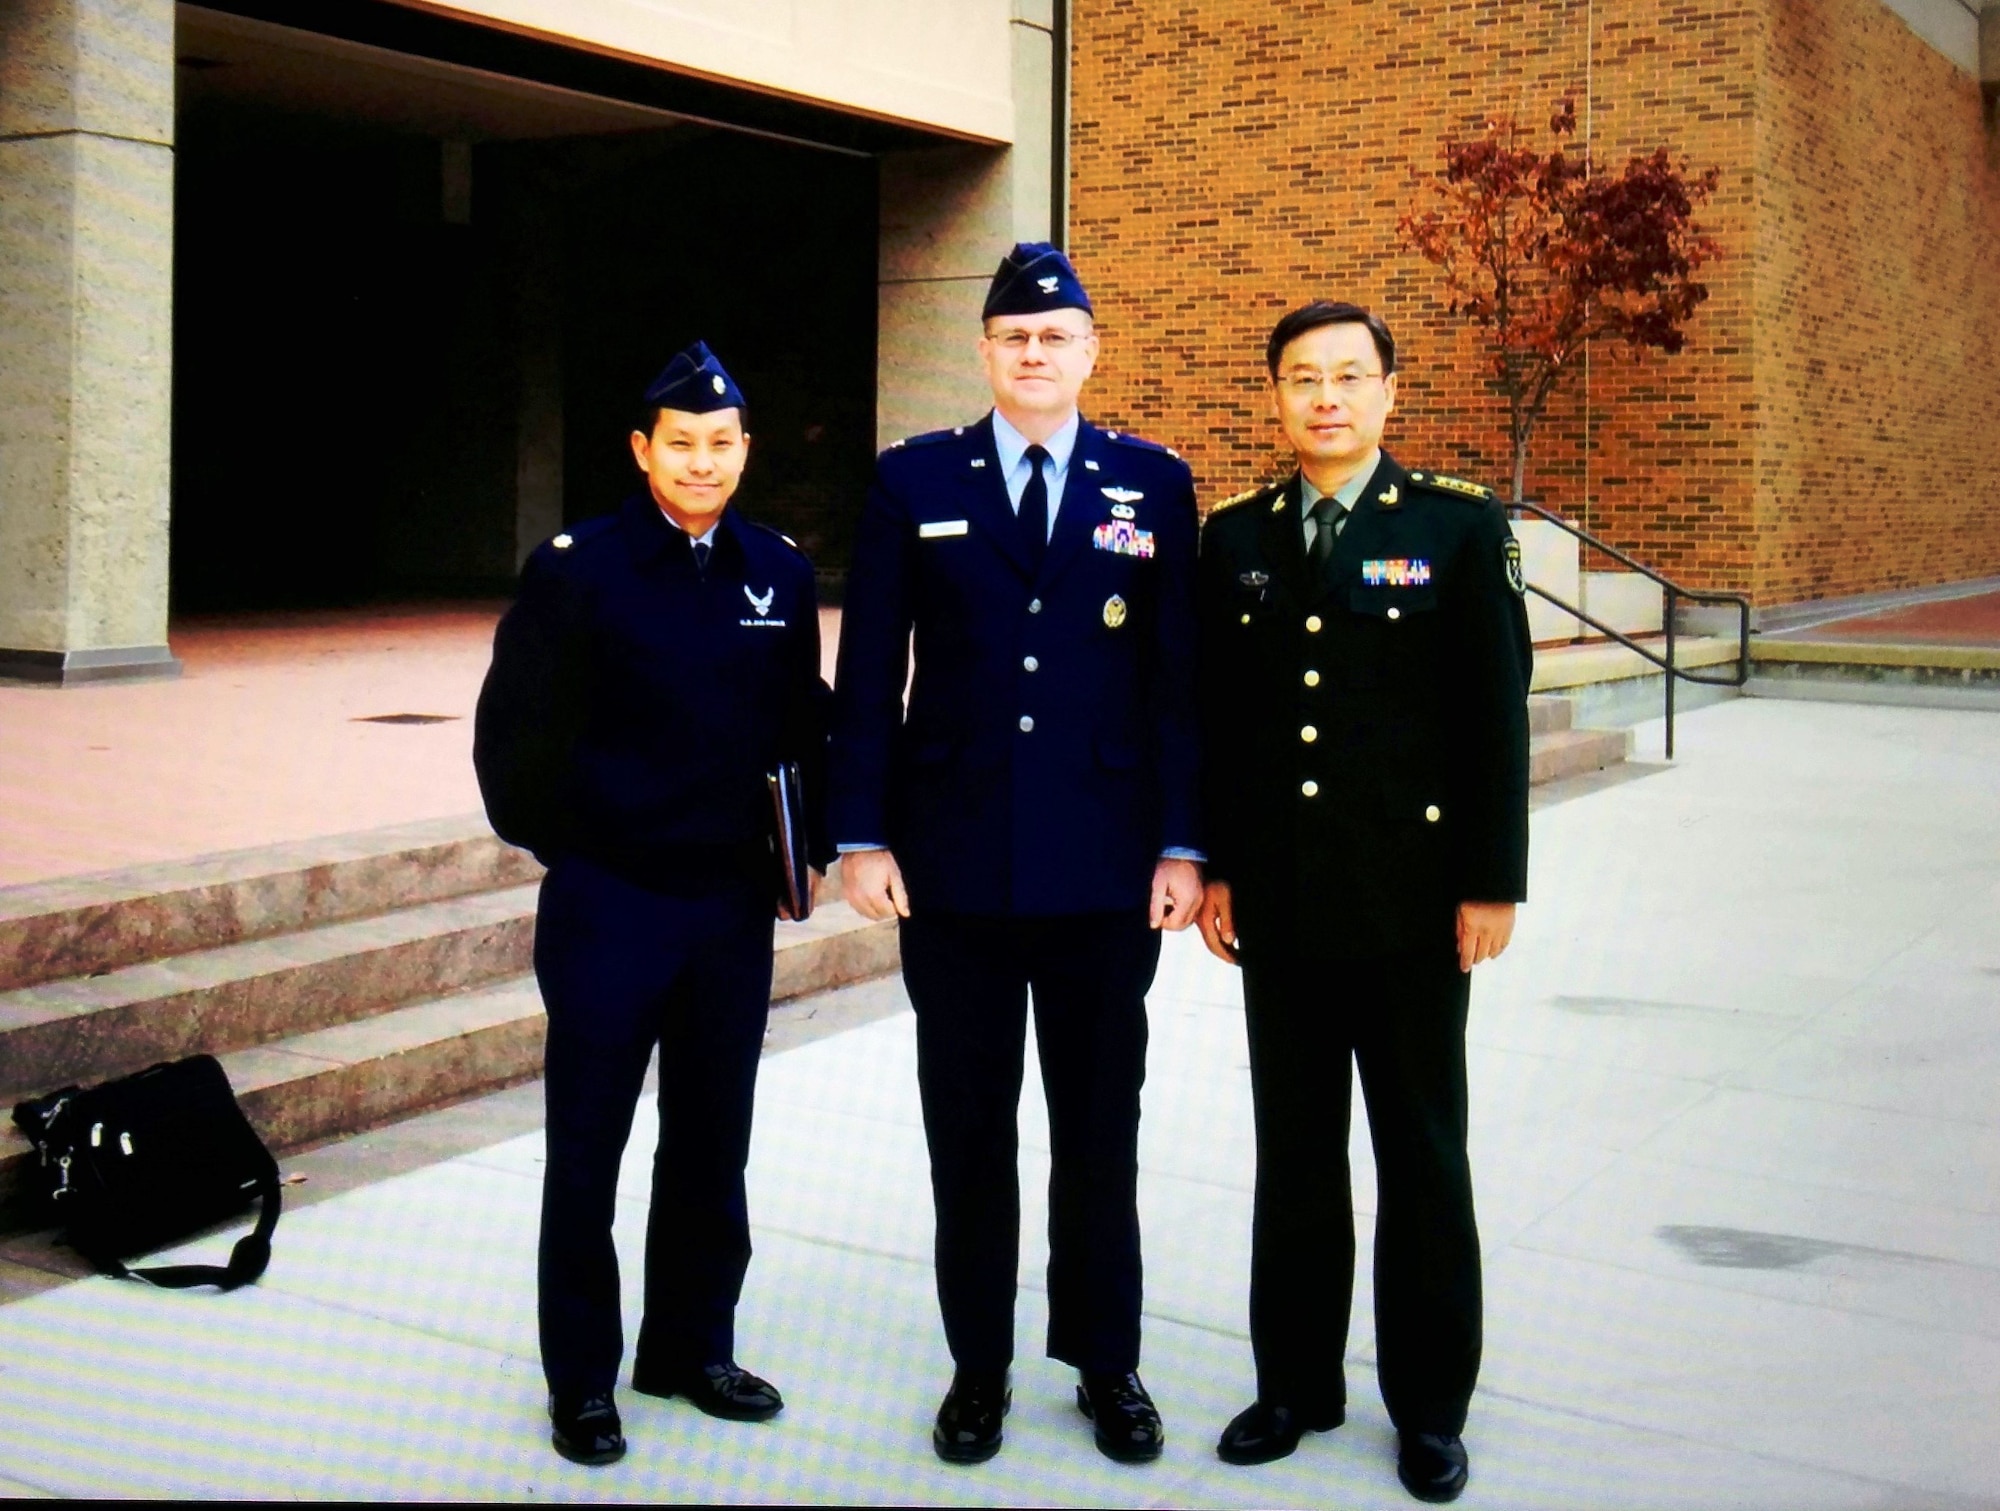 Col Alan Chambers (pictured center), former Director of AFMS International Health Specialist program, at an Acupuncture Exchange between the Department of Defense (DoD) and the People’s Liberation Army (PLA), Chinese military, at the Uniformed Services University (USU). On his left is Maj Andre Mach, IHS liaison, and on his right, a Senior Chinese Army official. (Bethesda, MD, December 2015.) Partnership exchanges like these are at the core of IHS program activities, sharing different approaches to medical practices and building relationships.